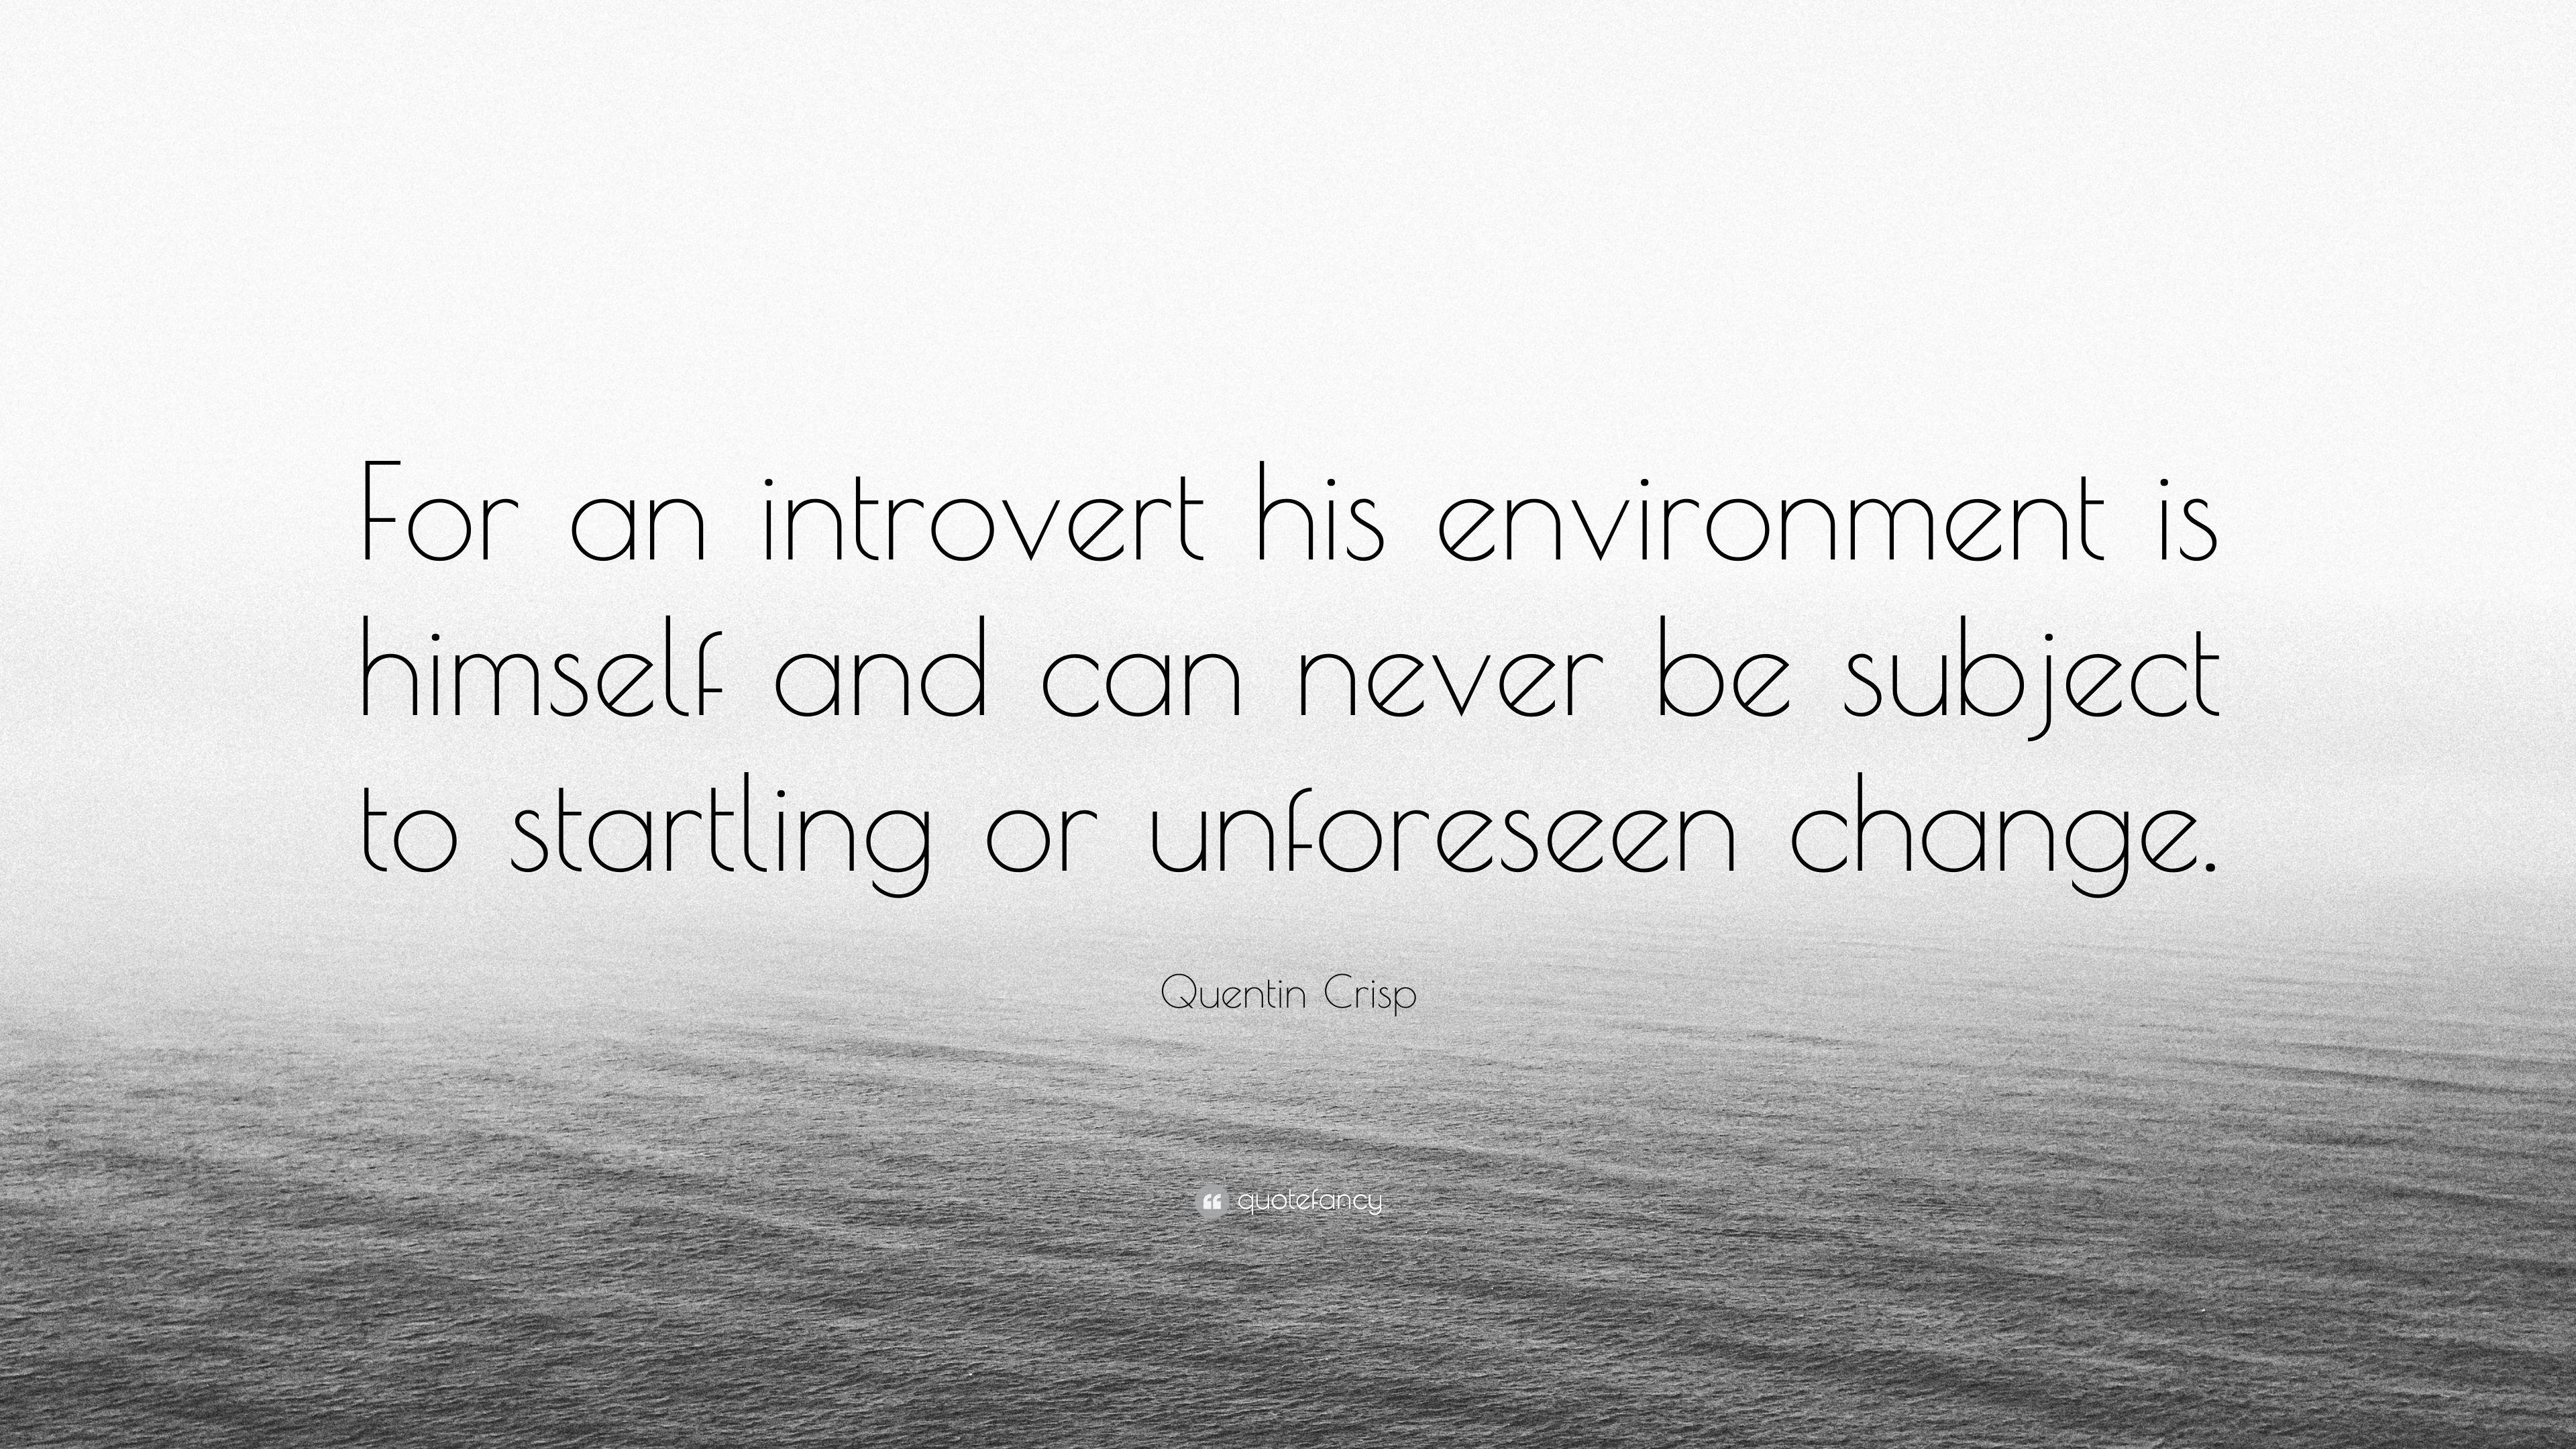 Quentin Crisp Quote: “For an introvert his environment is himself